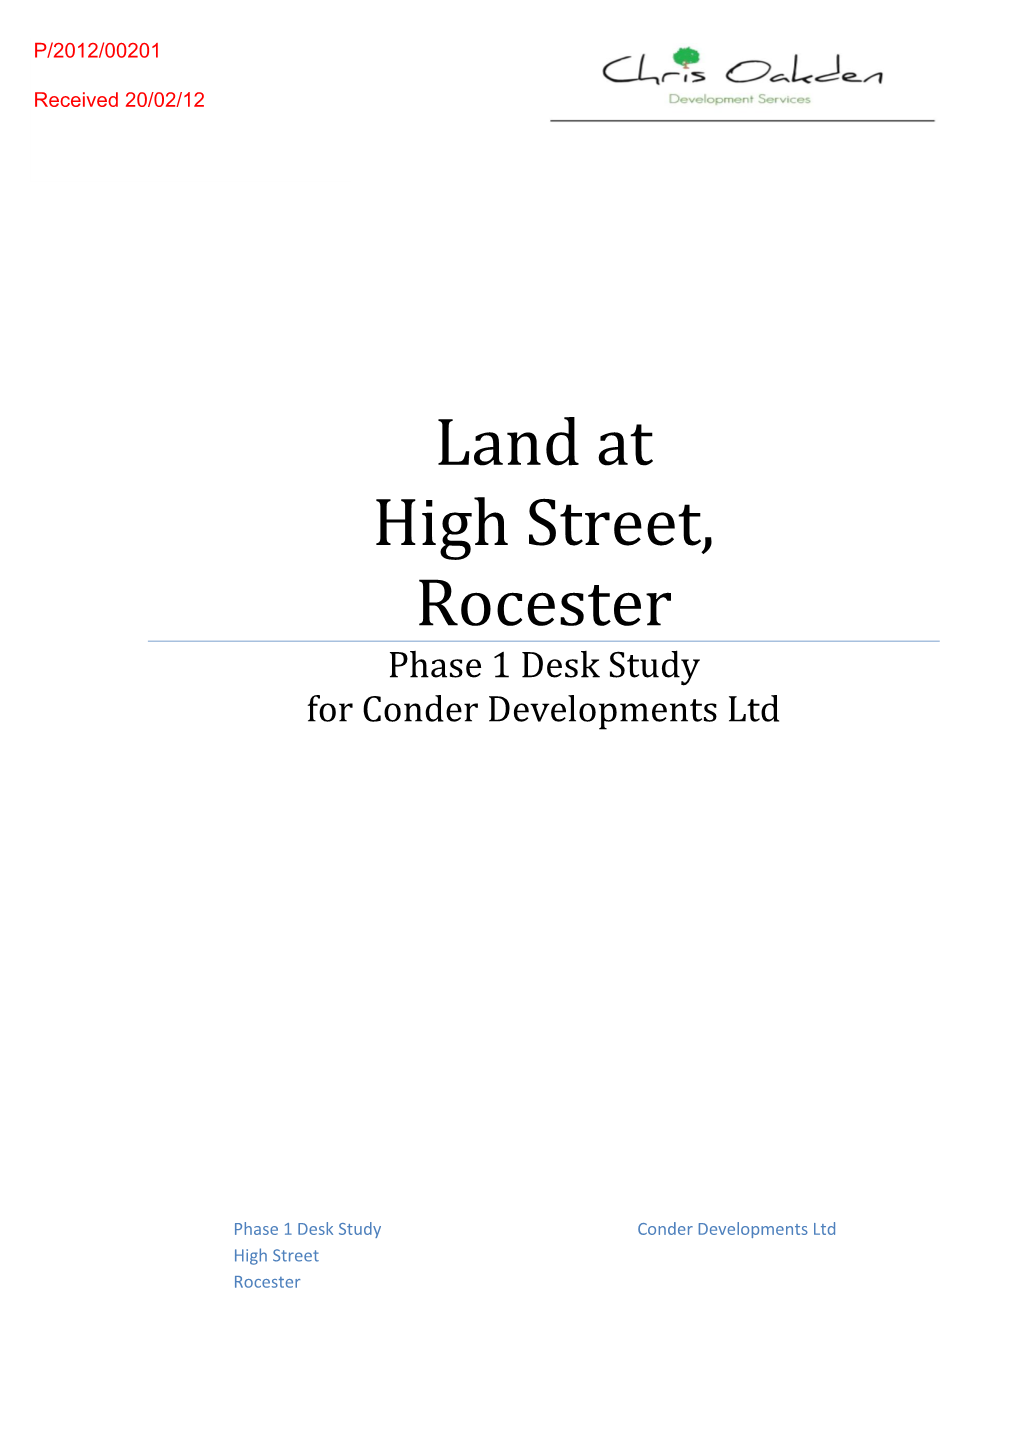 Land at High Street, Rocester Phase 1 Desk Study for Conder Developments Ltd